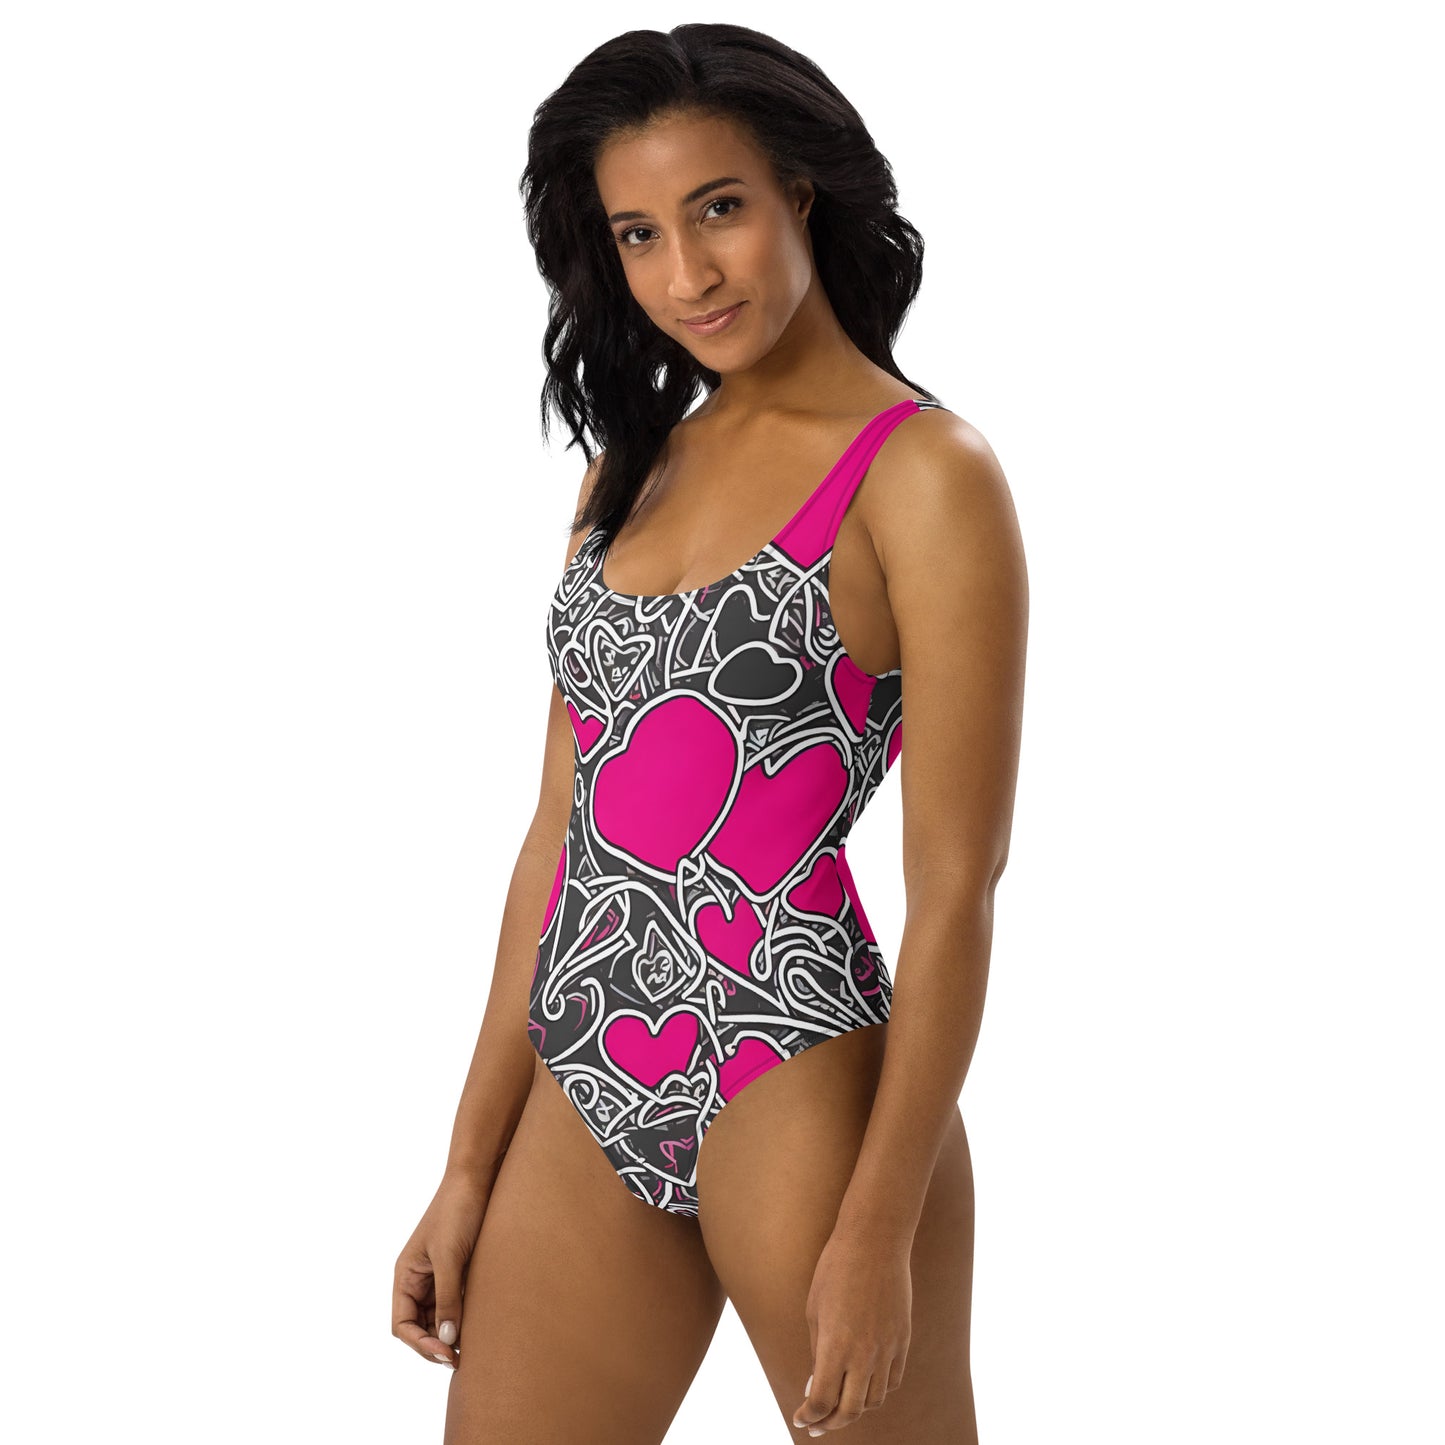 Crazy Heart : One-Piece Swimsuit